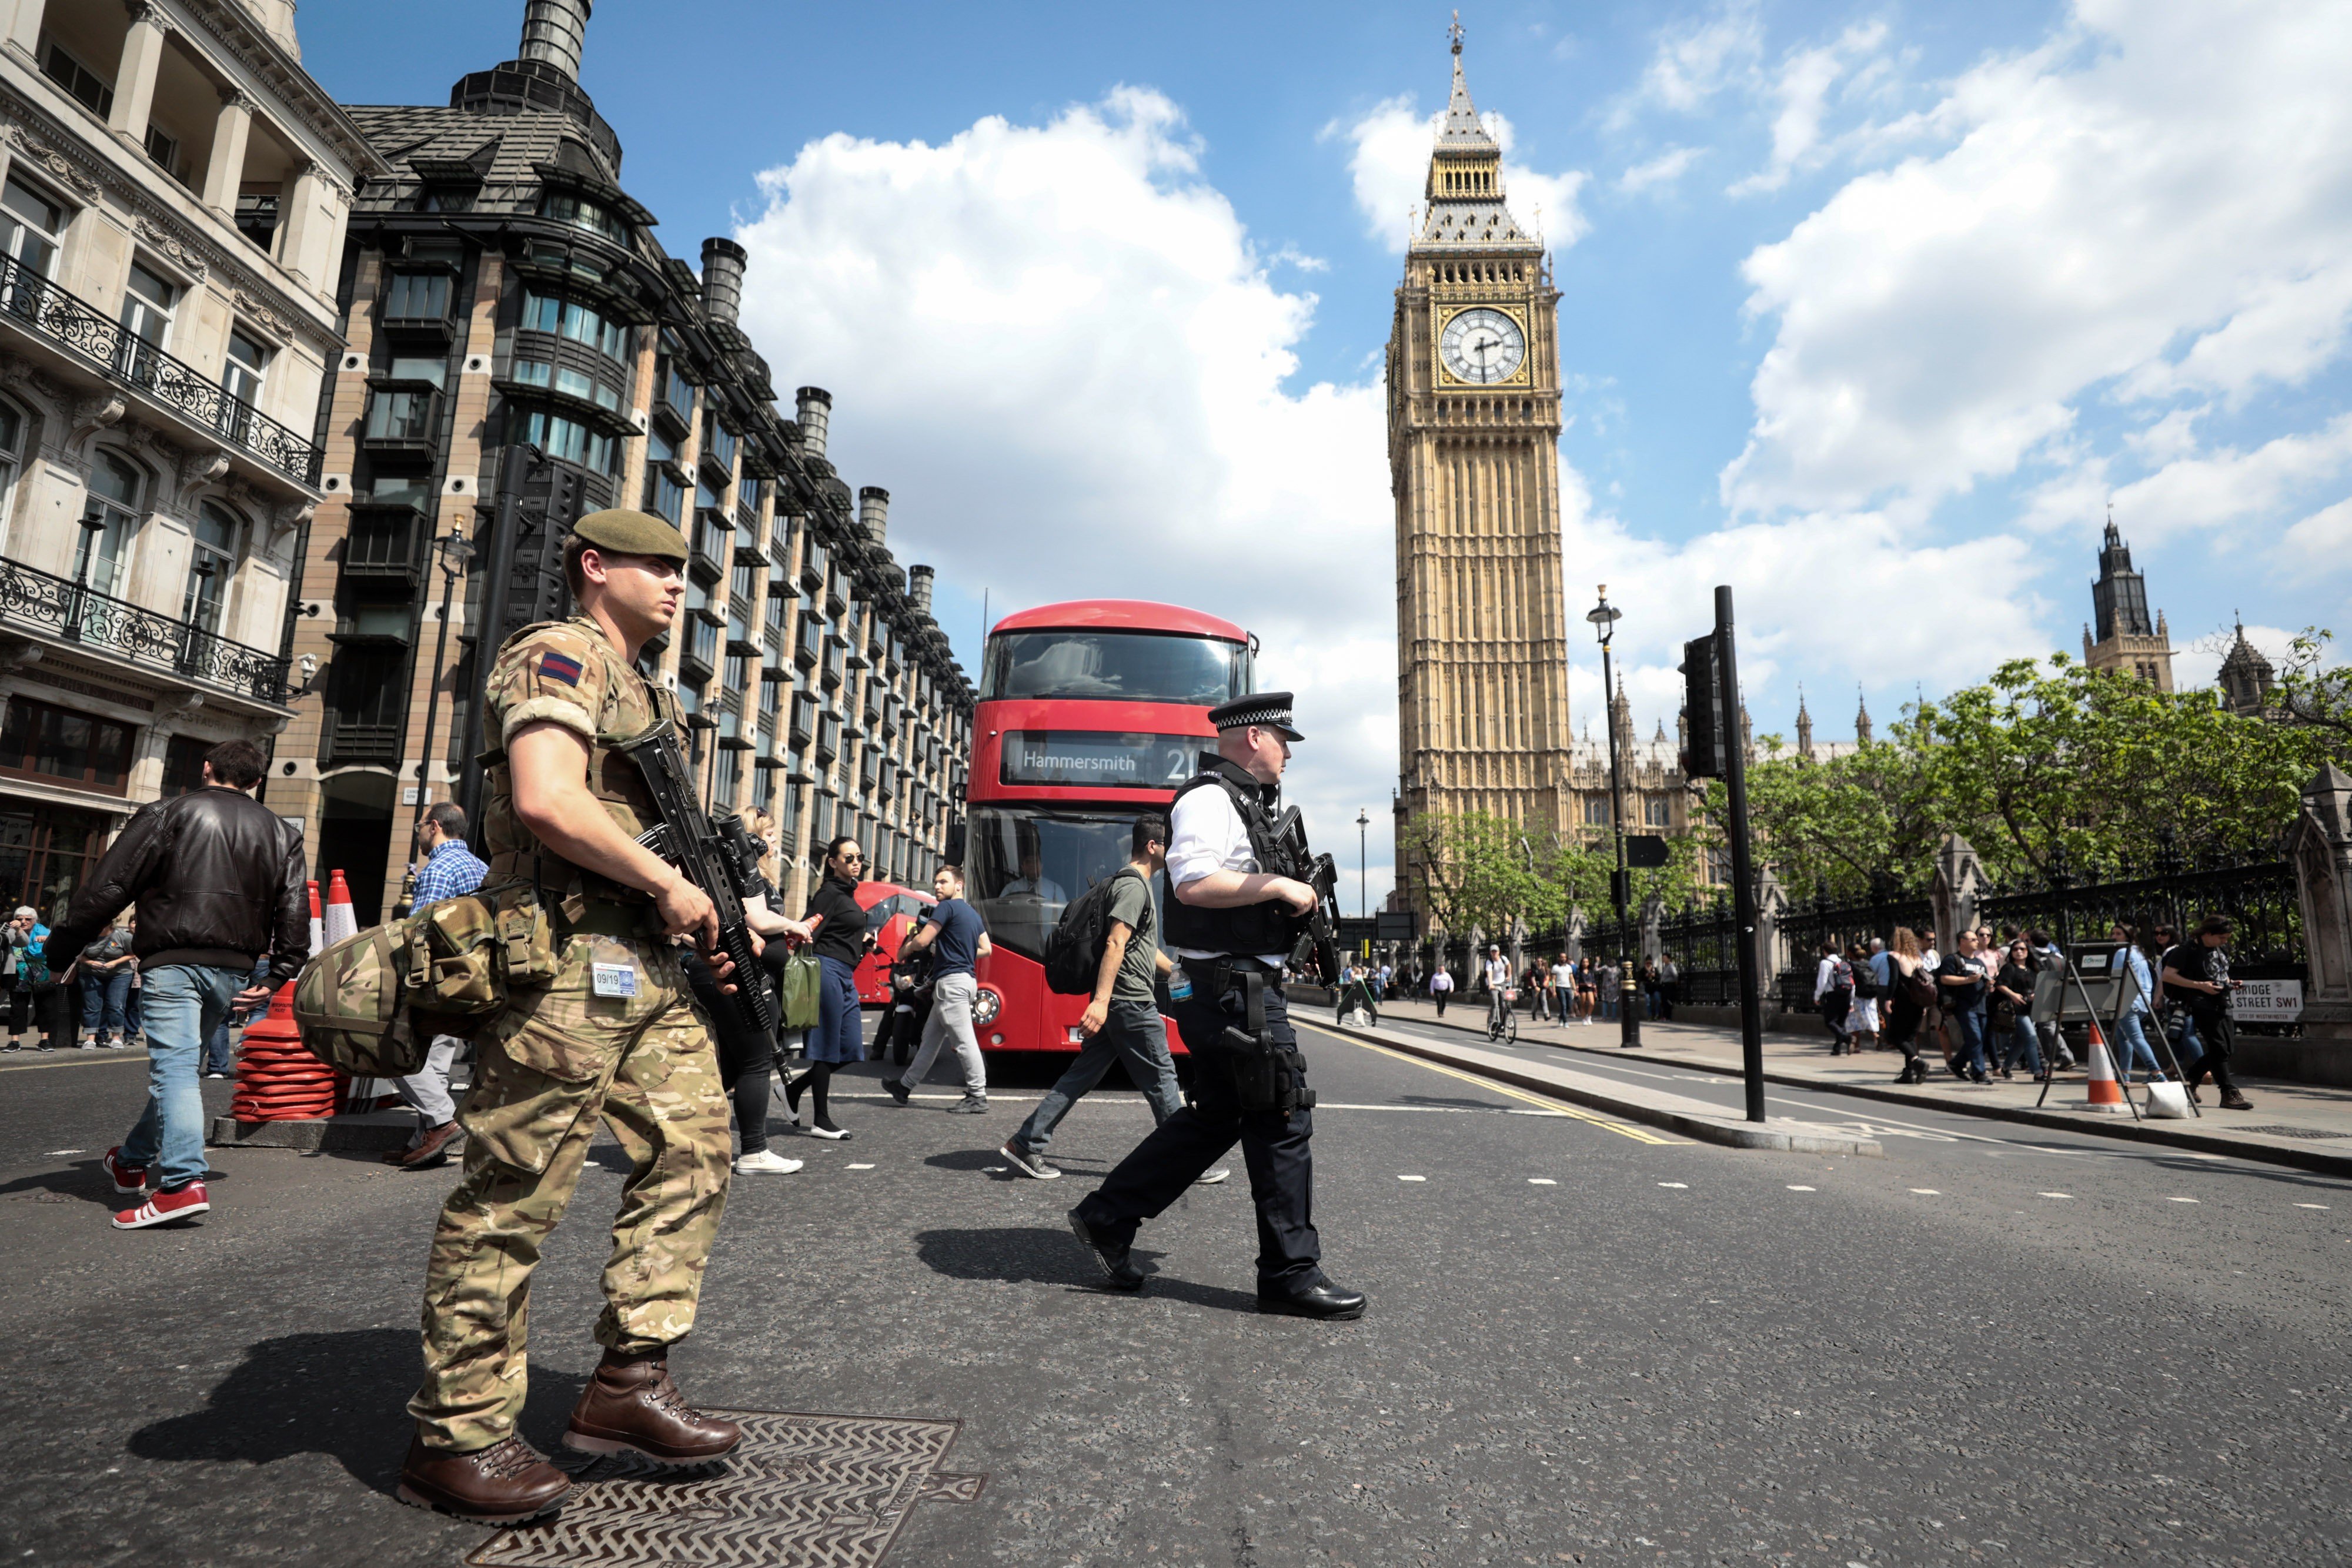 A soldier and an armed police officer patrol near the Elizabeth Tower, also known as Big Ben, in London on May 24. Photo: Bloomberg